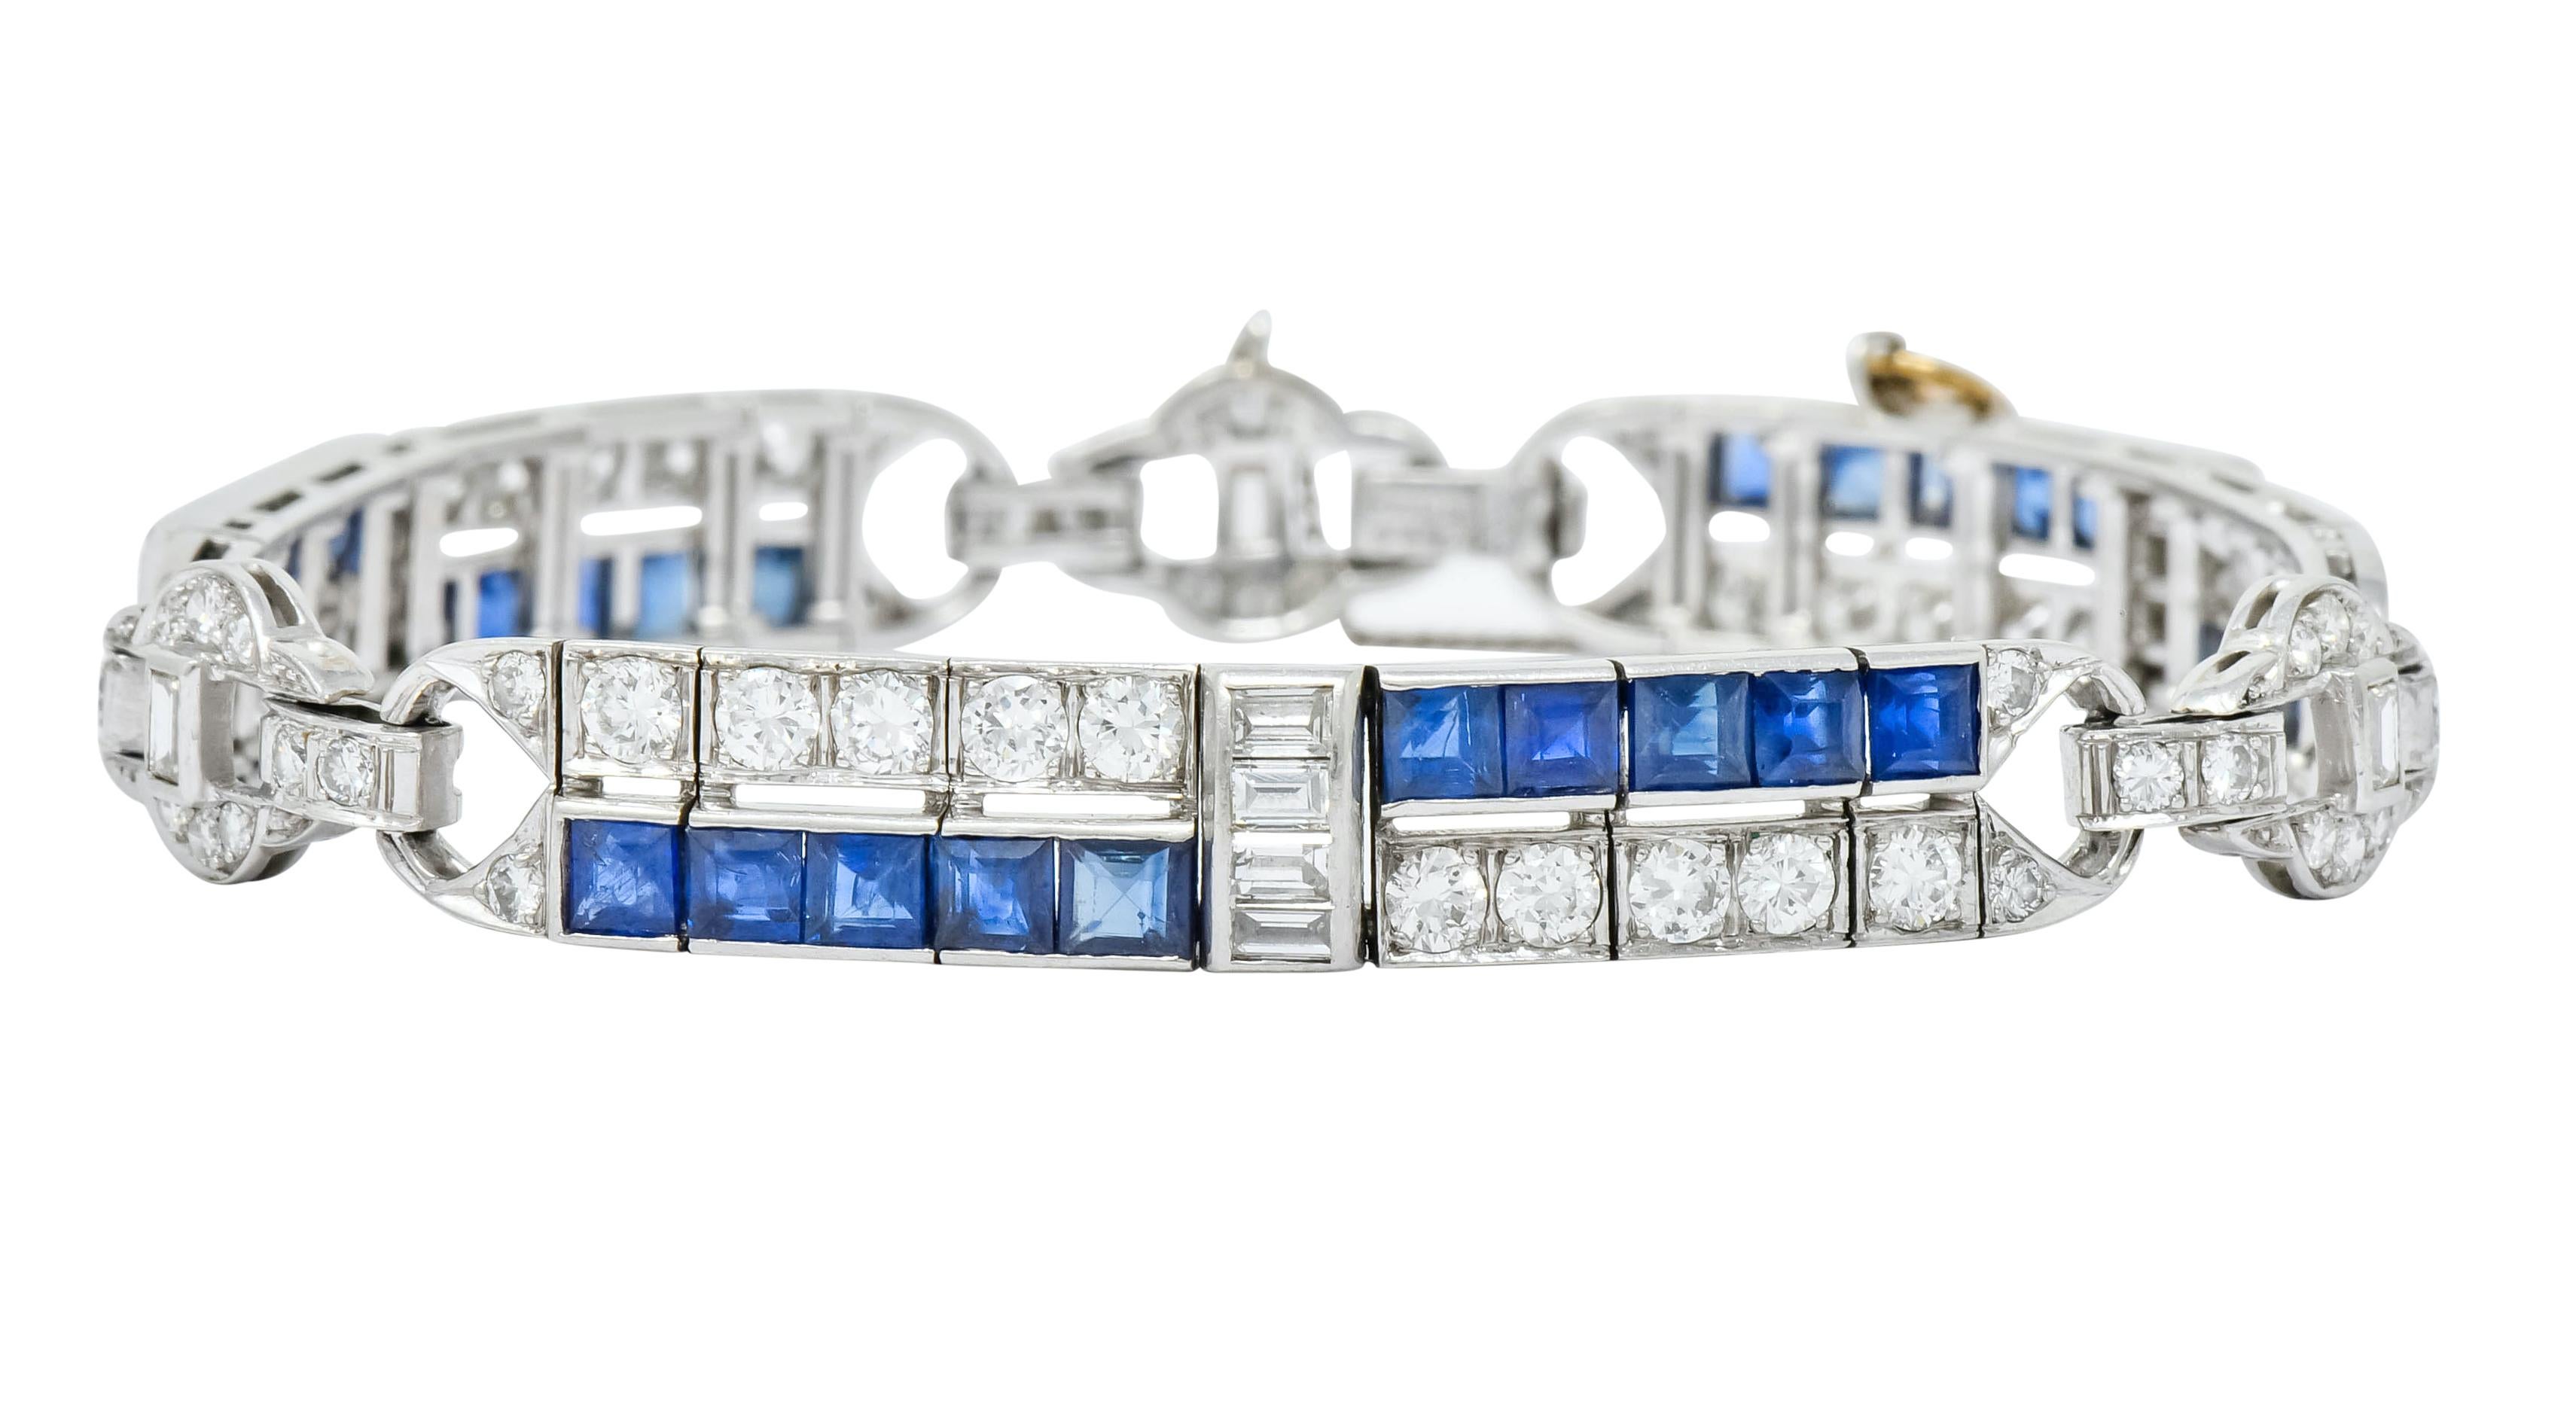 Link style bracelet designed as square form links set in a double row, channel set and bead set with diamonds and sapphires

Round brilliant cut and baguette cut diamonds throughout, weighing 5.10 carats are F to G in color and VS